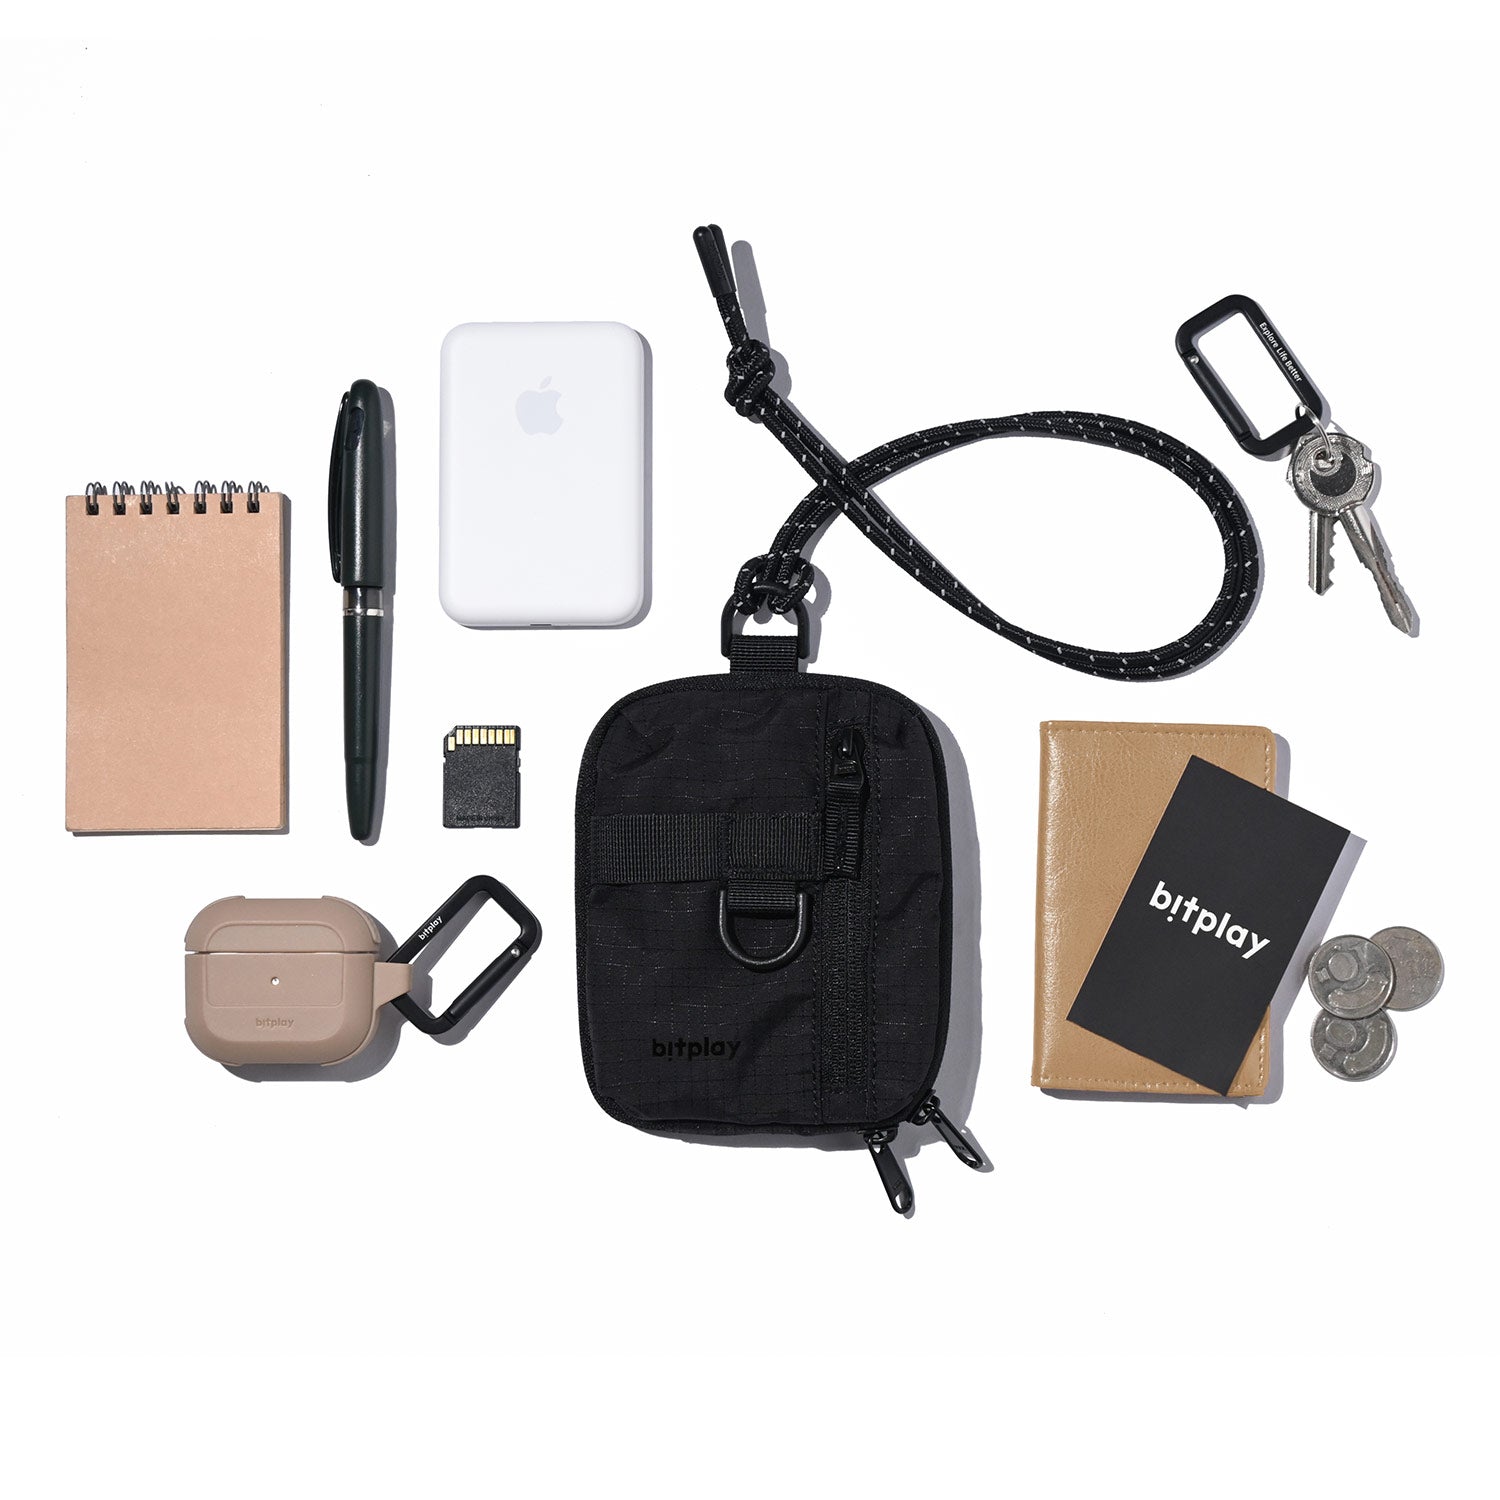 Essential Pouch Ripstop - Black